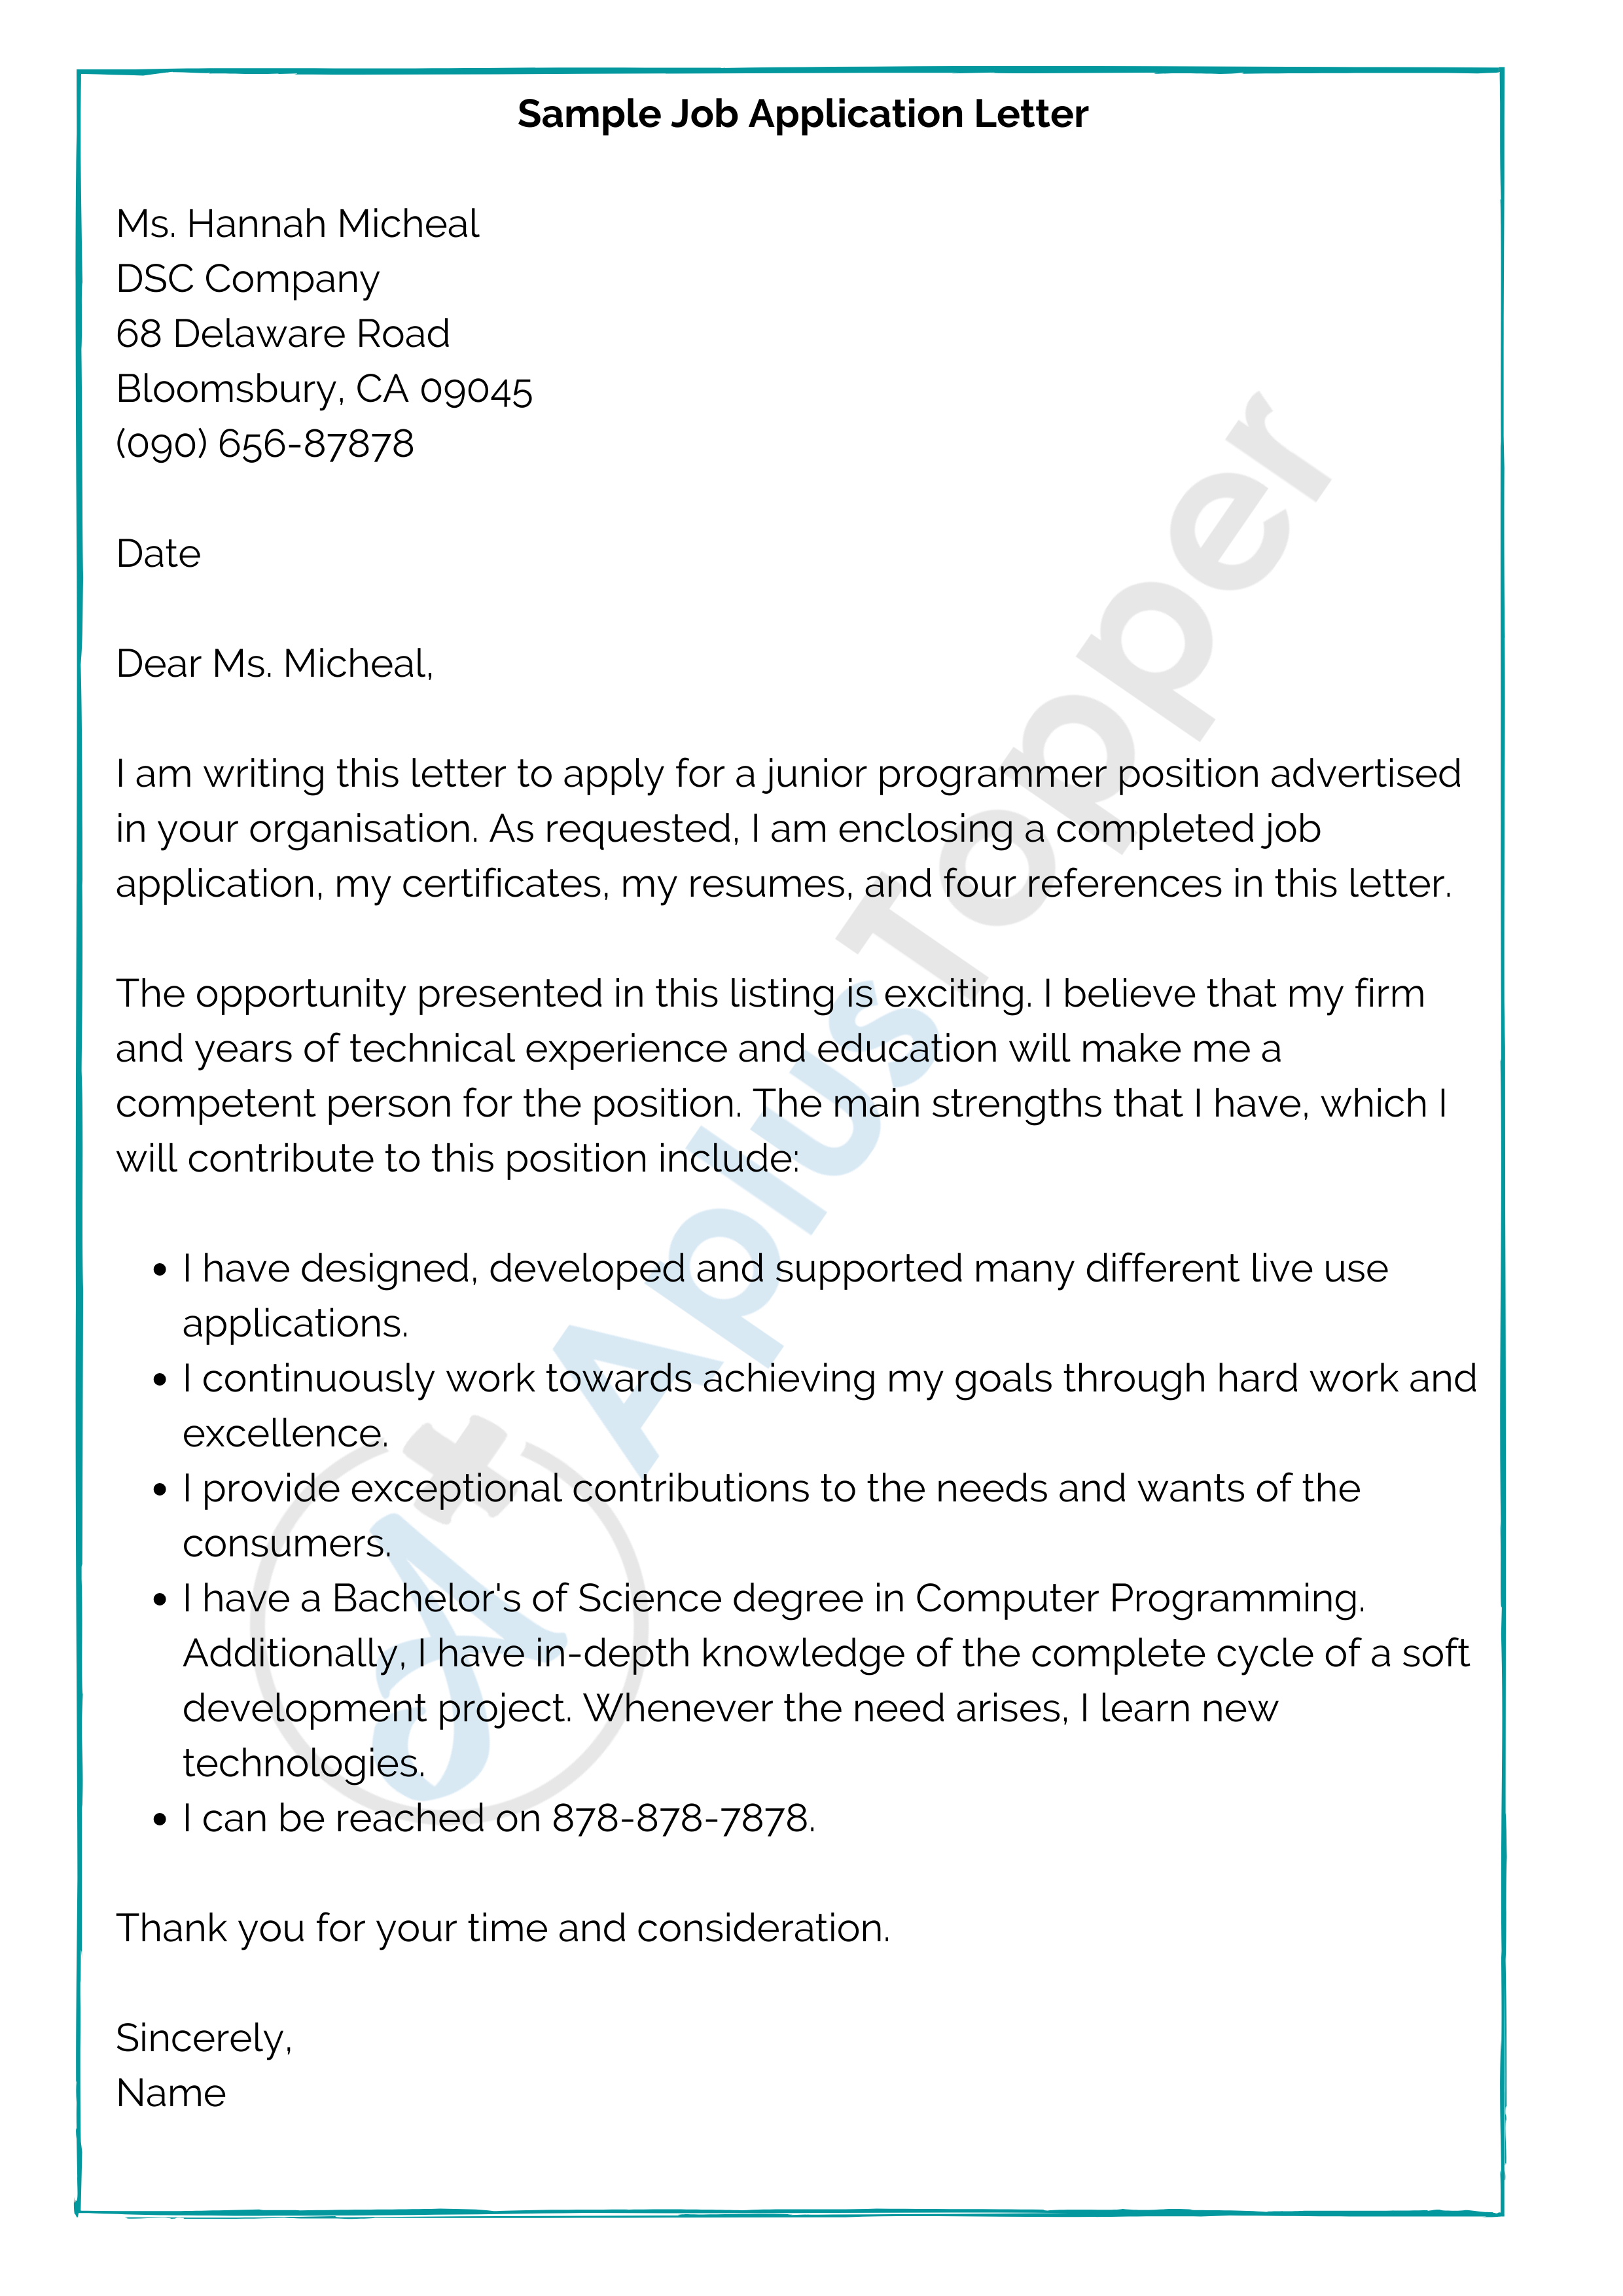 how to make an application letter for a job